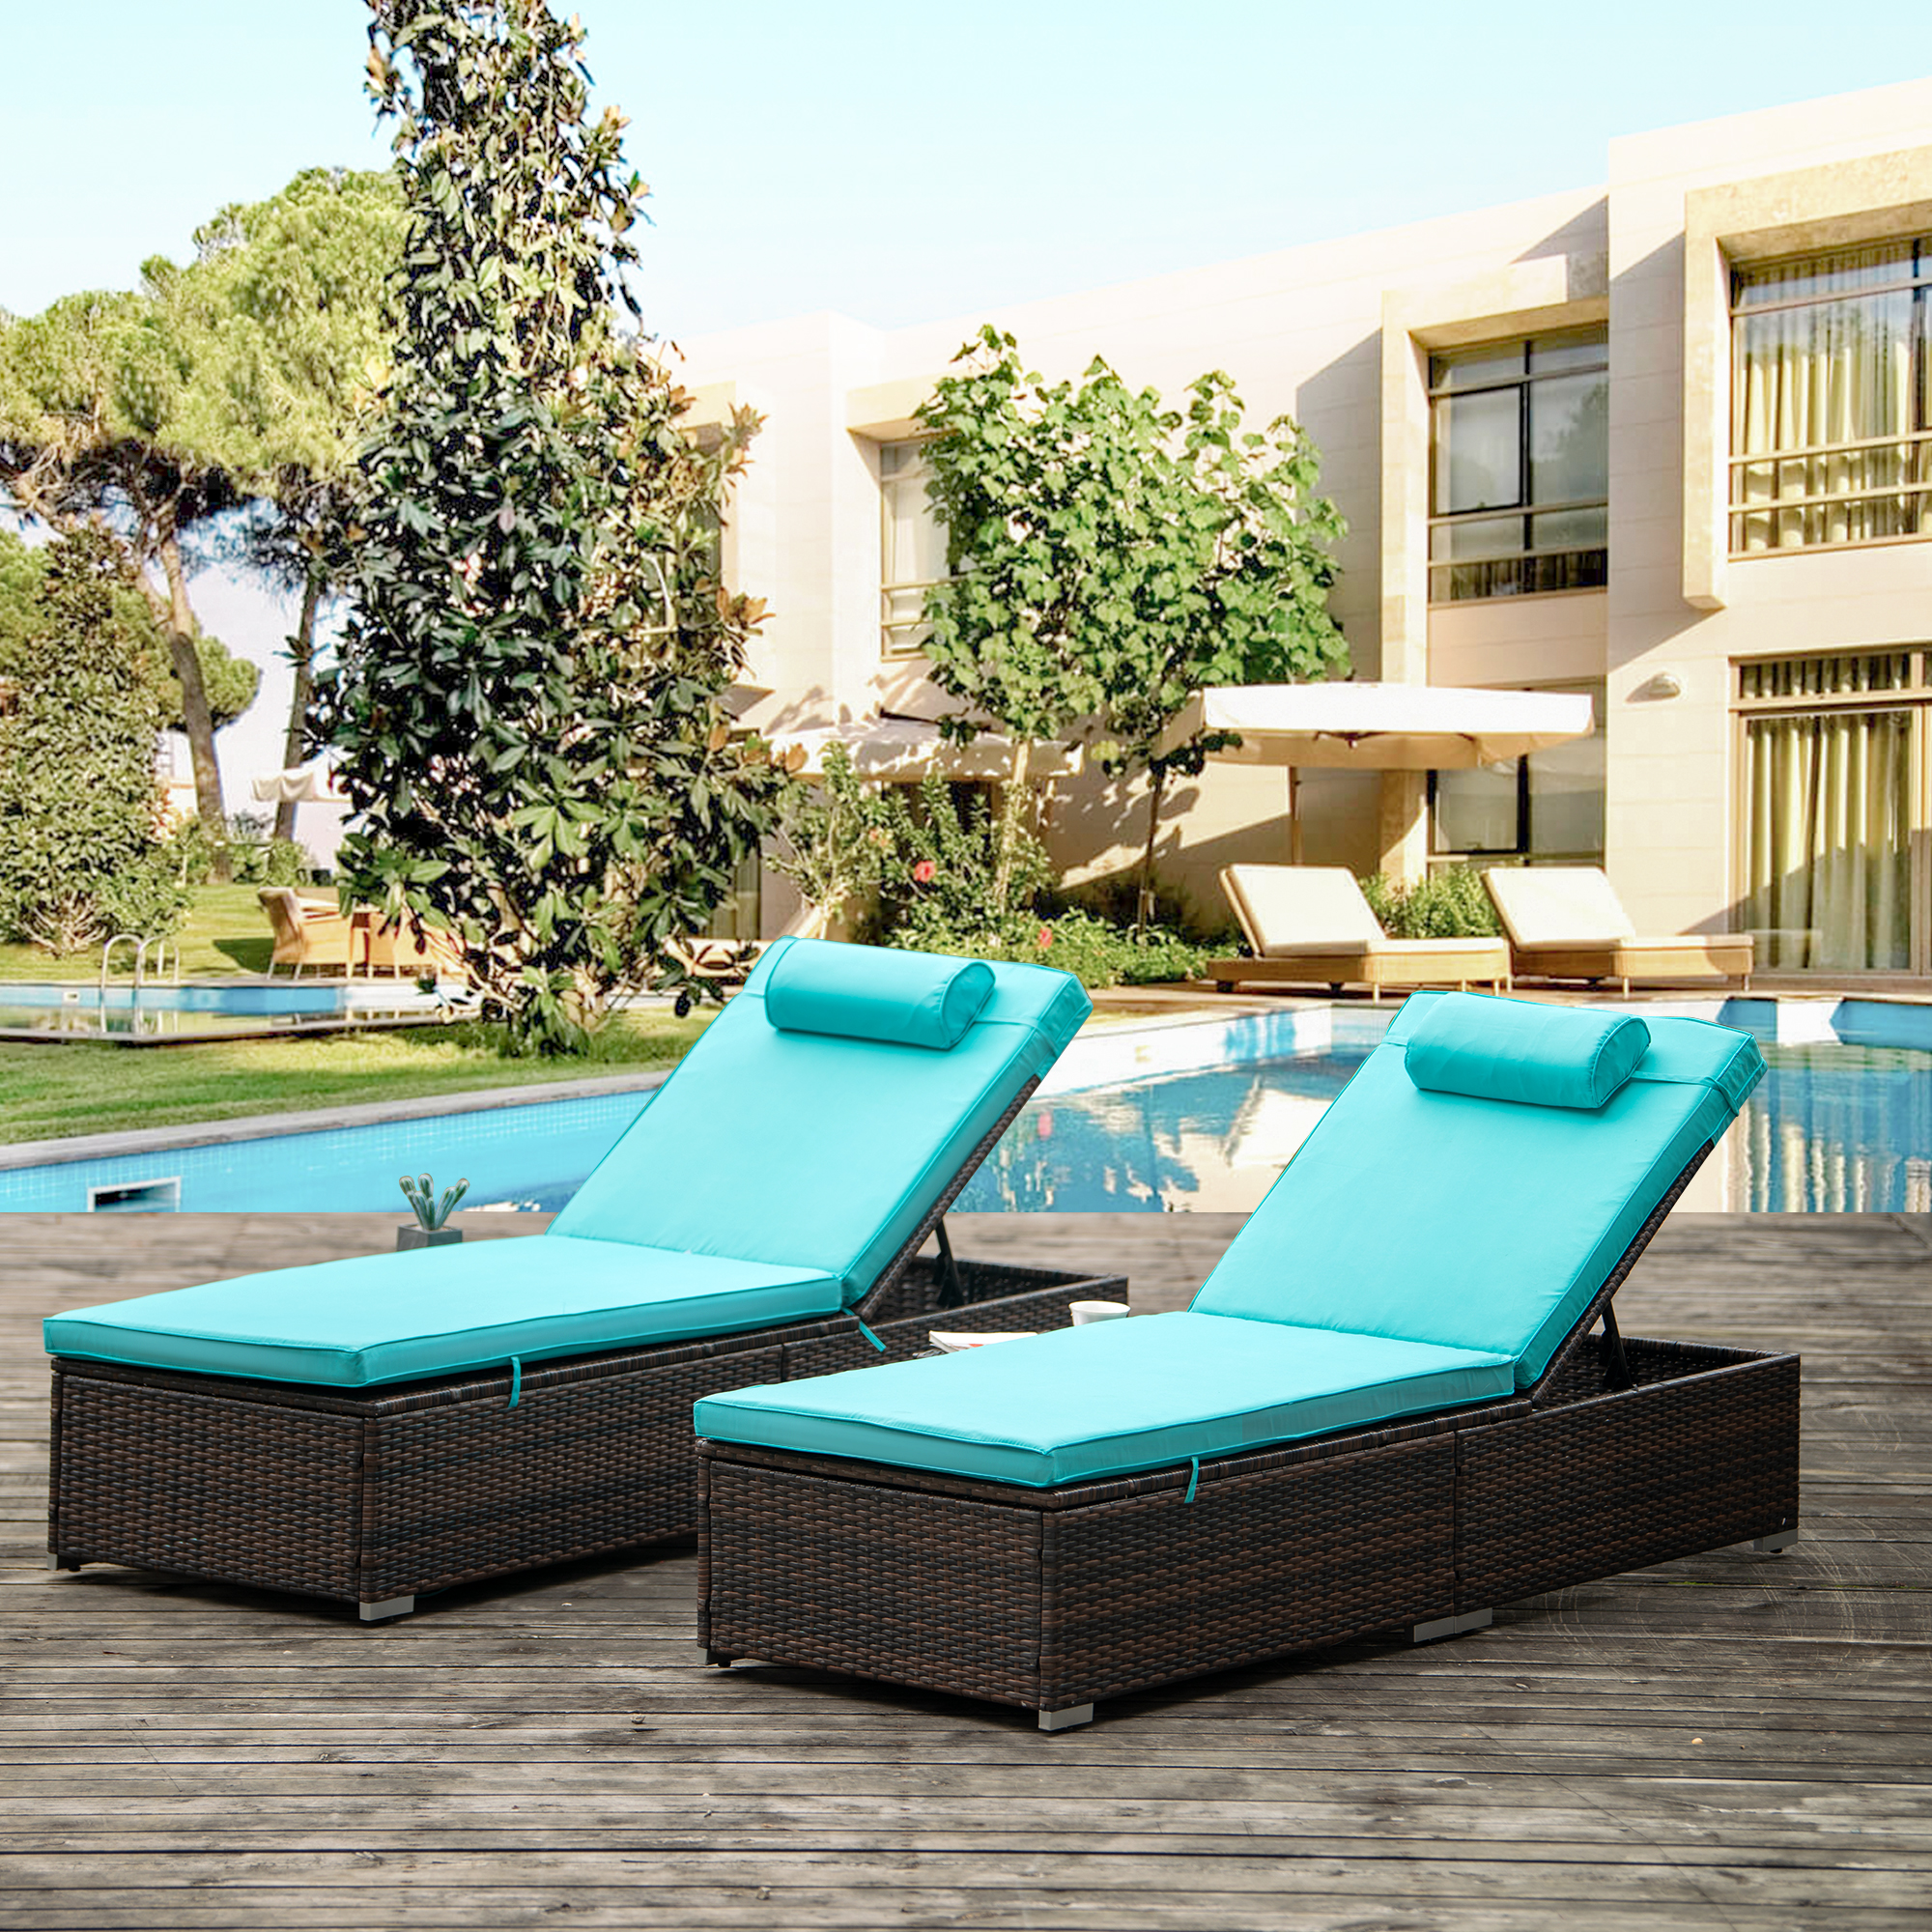 2 Pieces Outdoor Patio PE Wicker Chaise Lounge Set, Adjustable Reclining Lounge Chairs with Side Table and Head Pillow, Outdoor Chaise Lounger with Cushions for Patio Pool Backyard Porch Garden, B67 - image 2 of 11